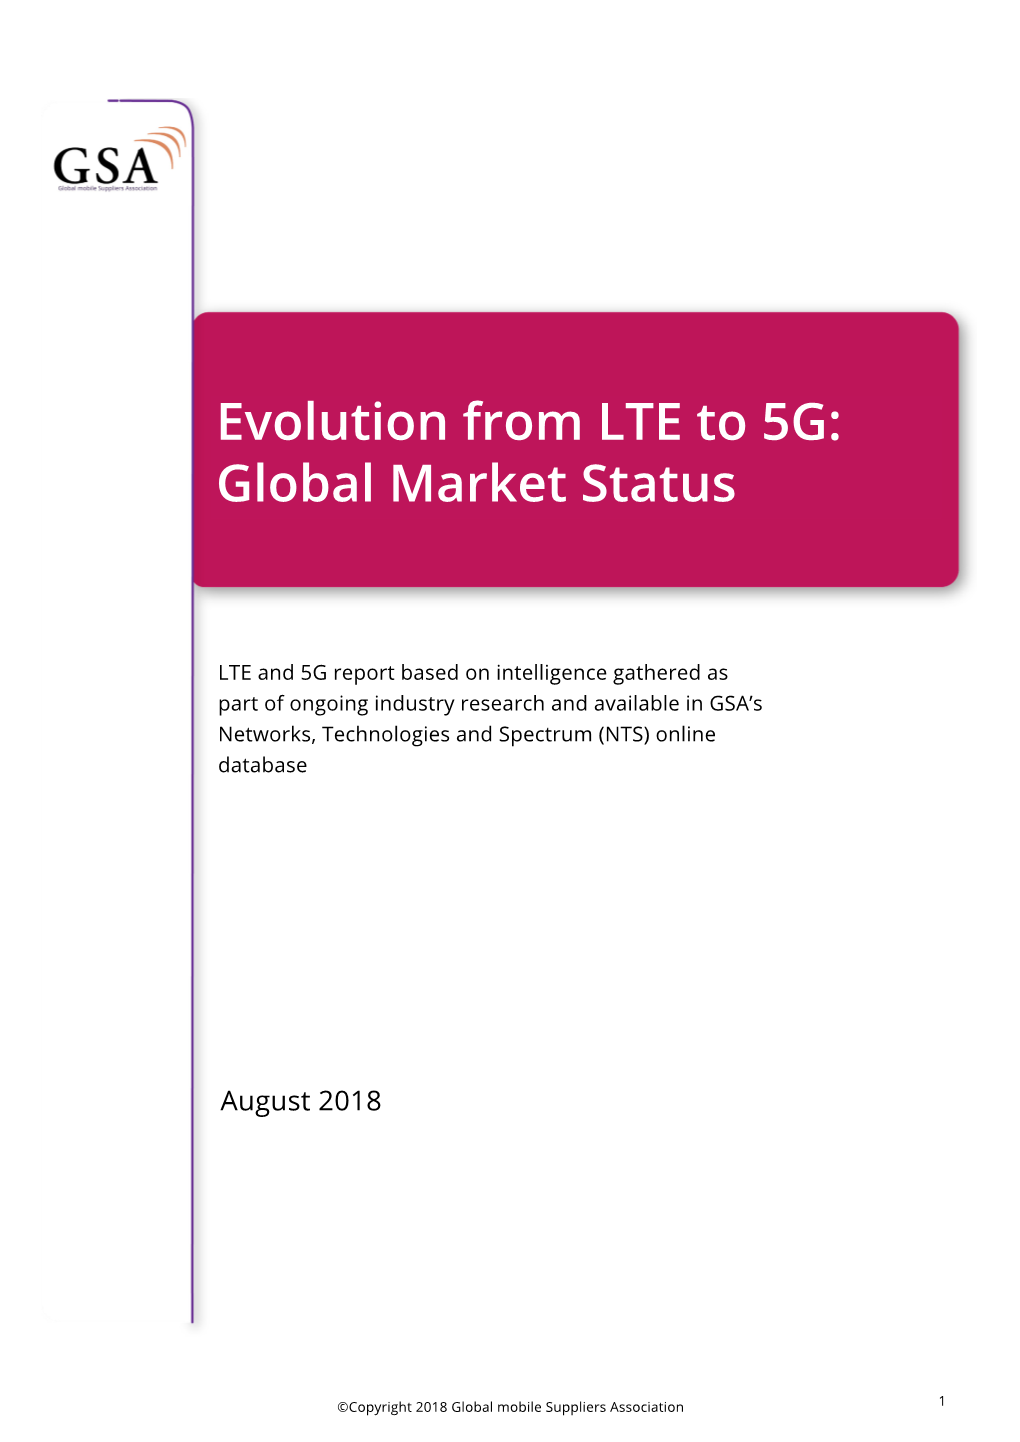 Evolution from LTE to 5G: Global Market Status